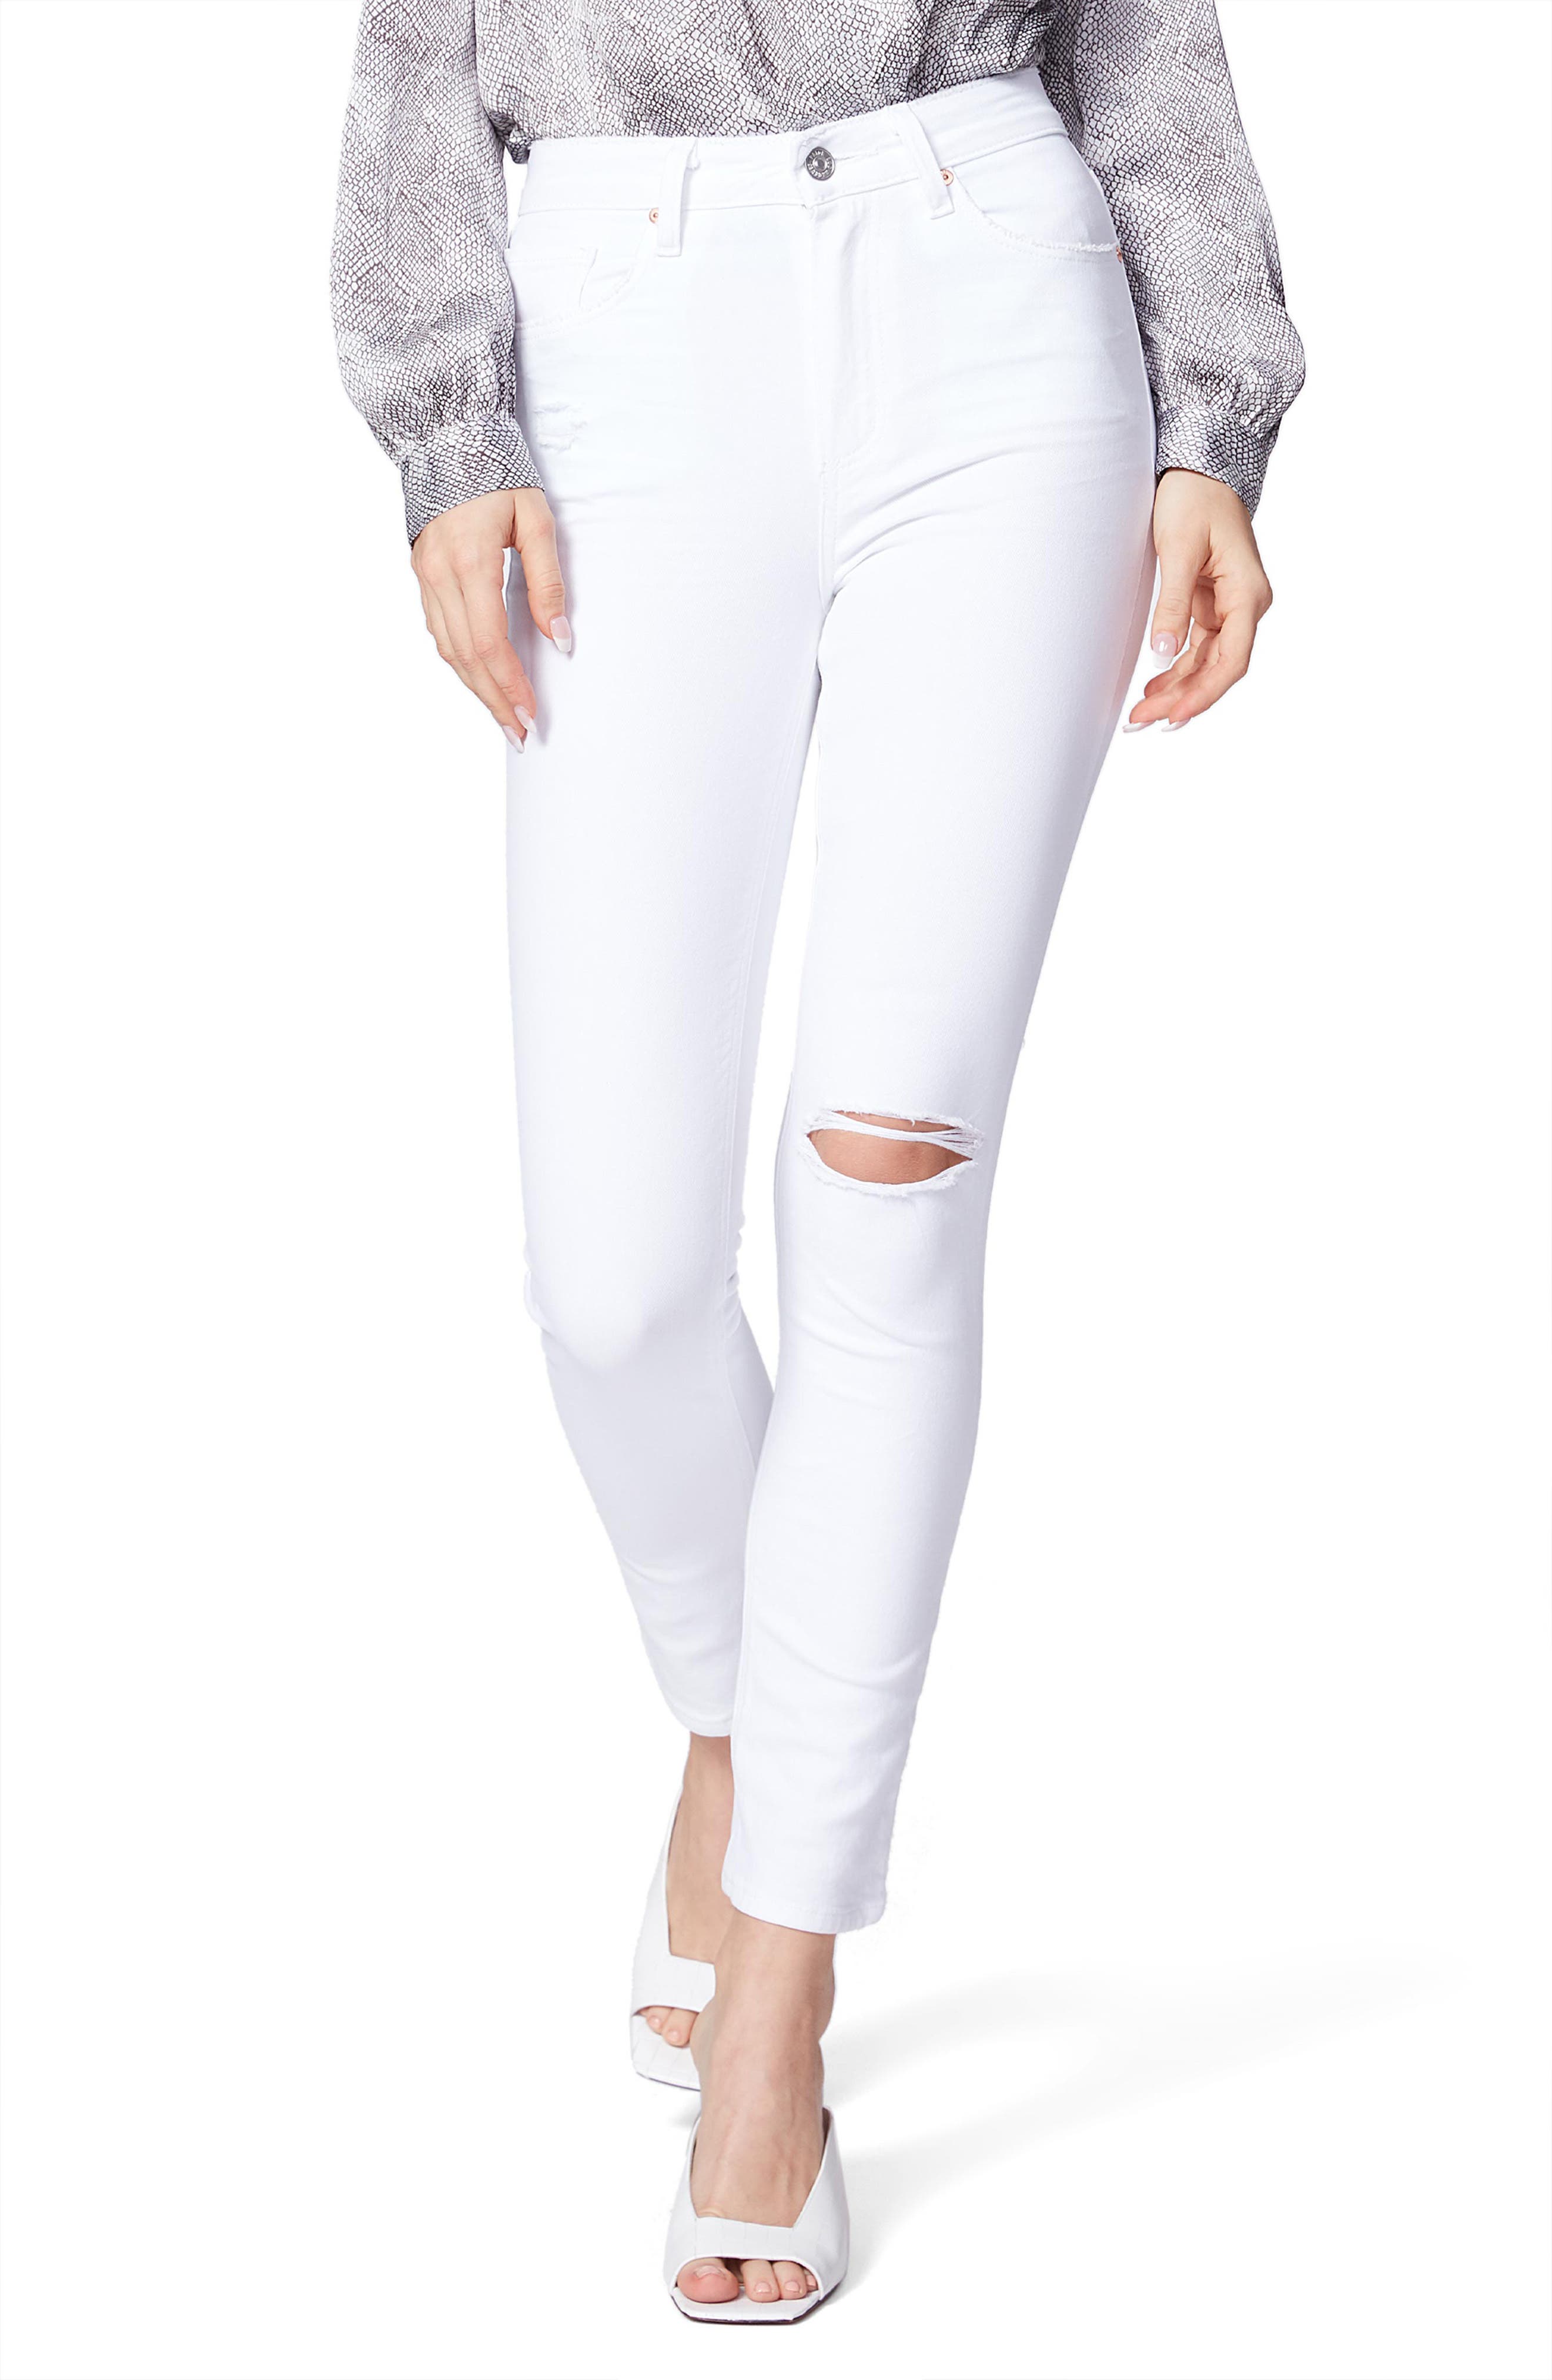 paige white jeans nordstrom rack